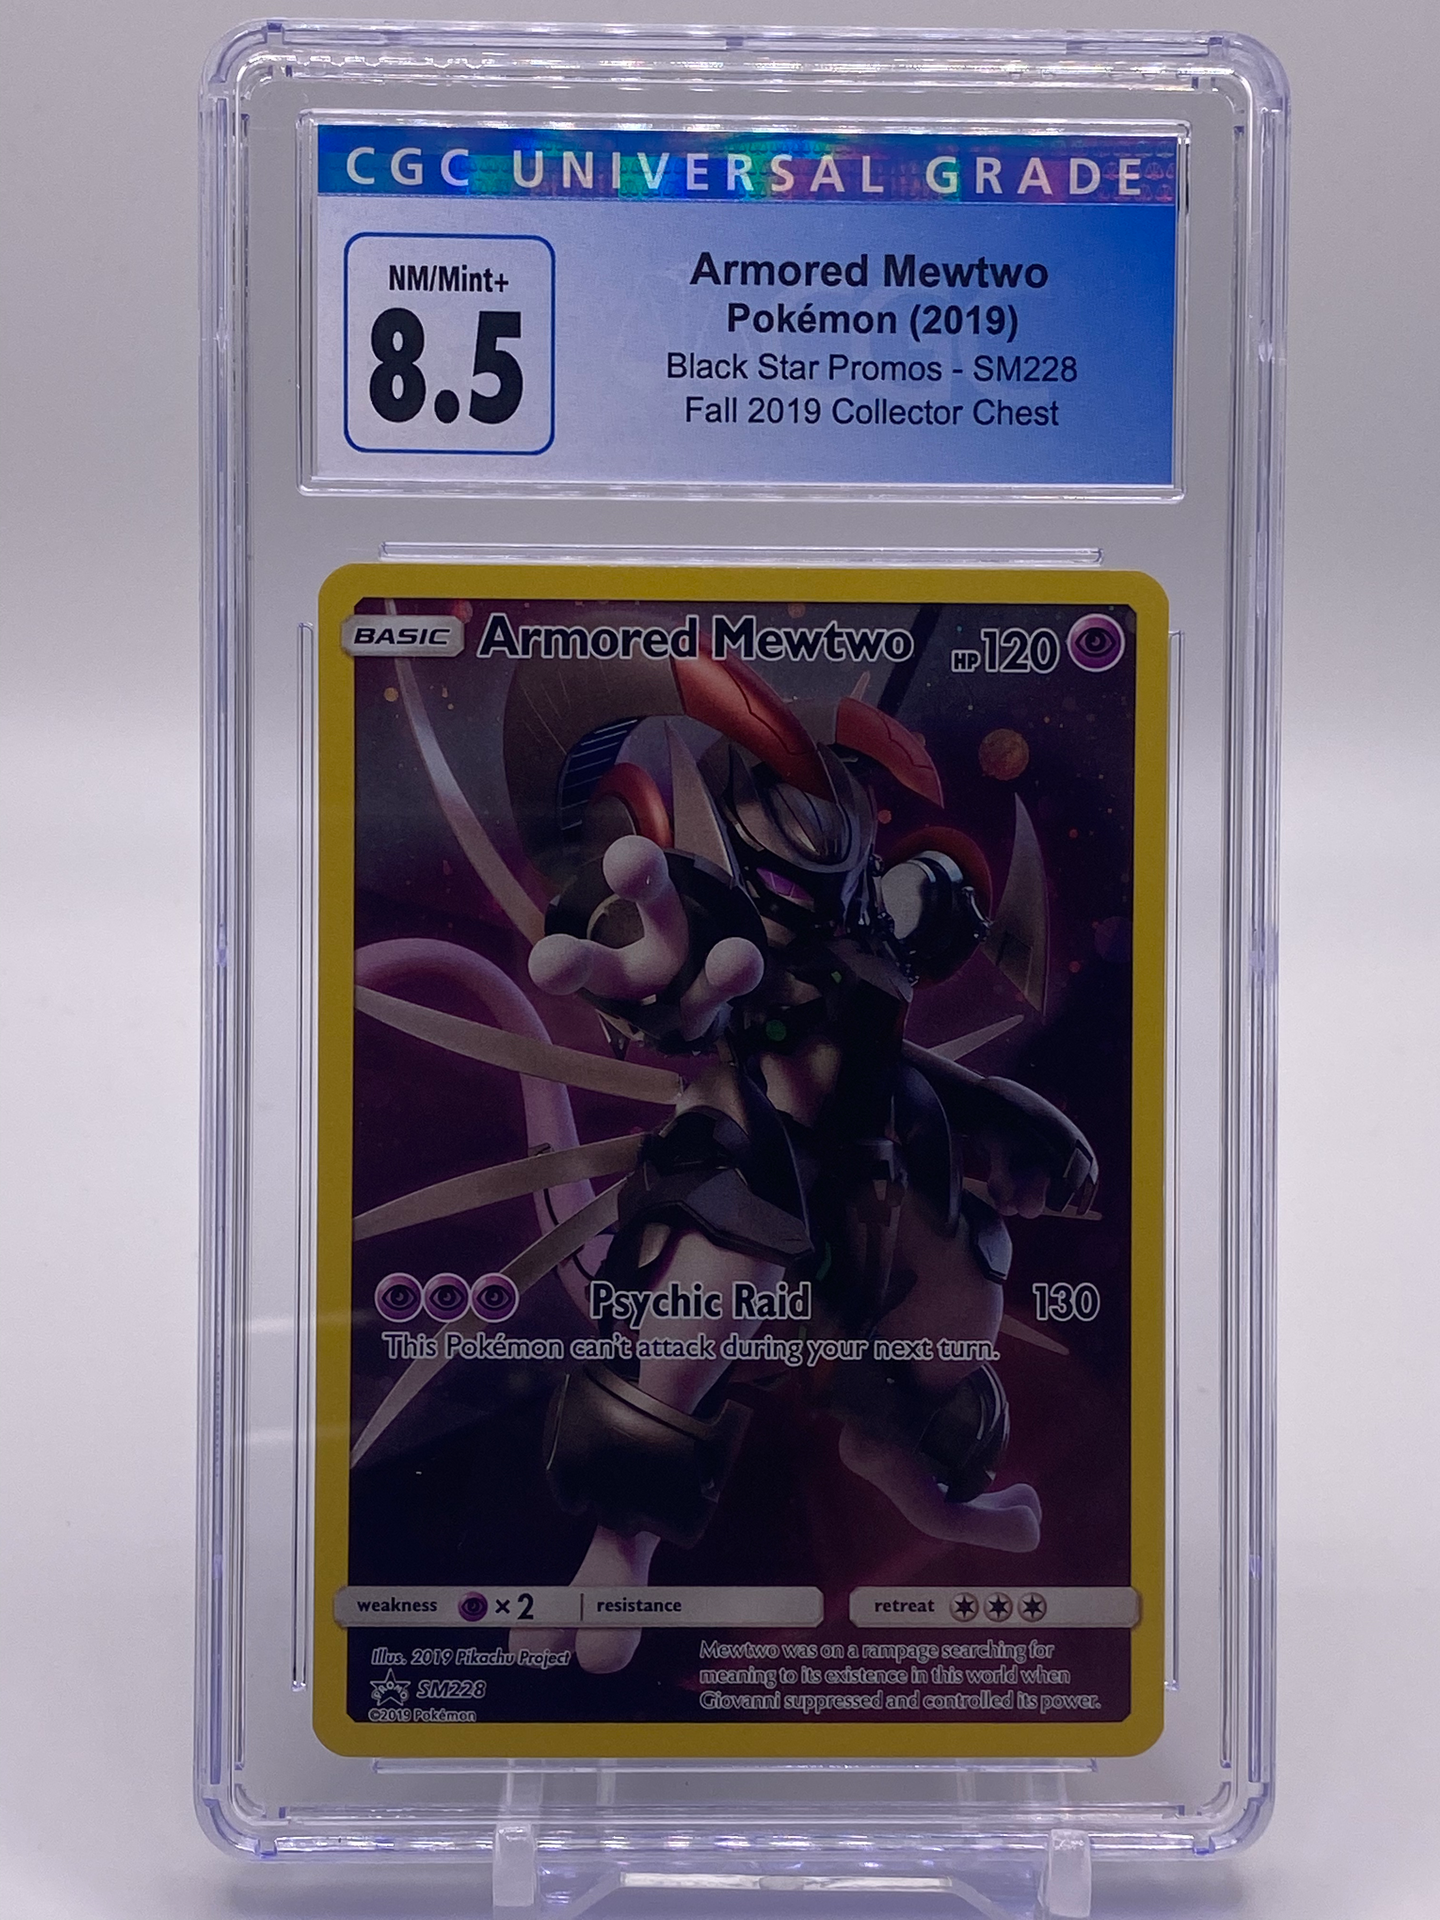 CGC 8.5 Armored Mewtwo Holo (Graded Card)